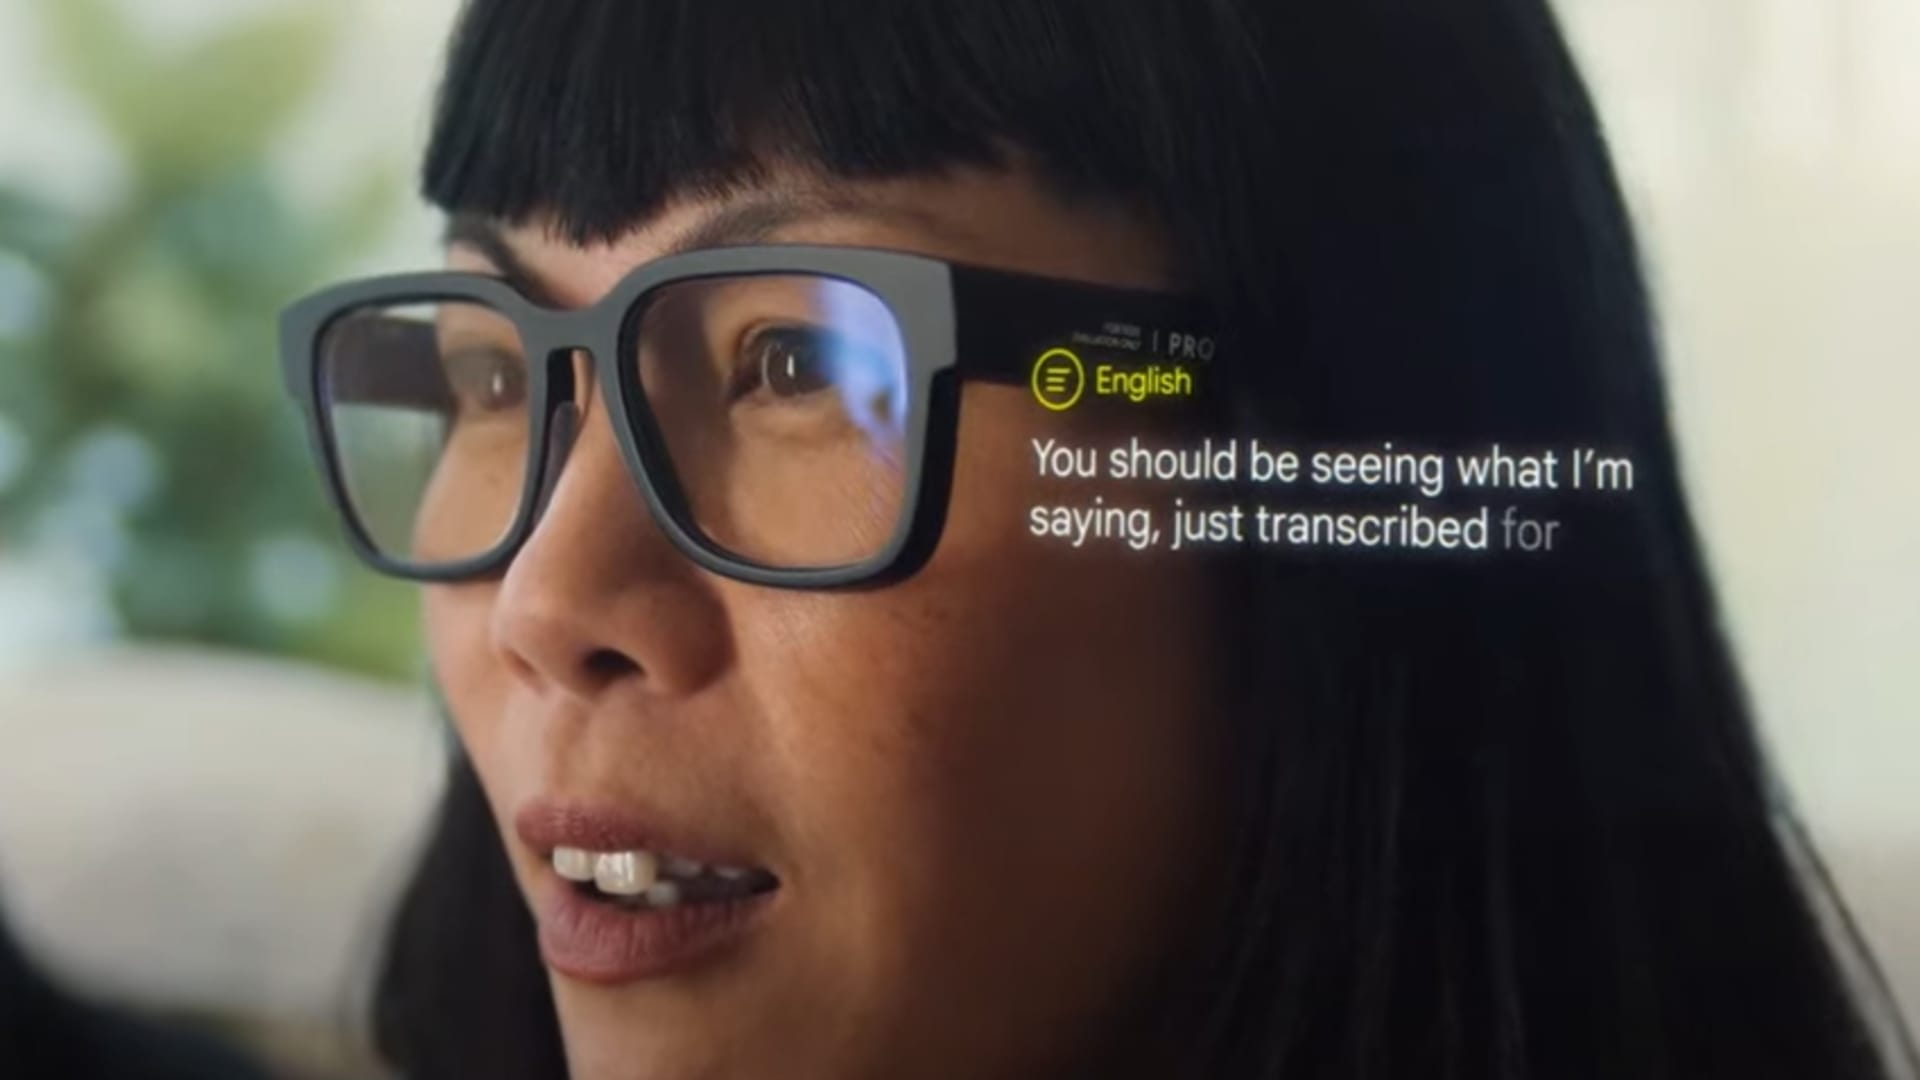 Google smart glasses prototype translates languages ​​in real time